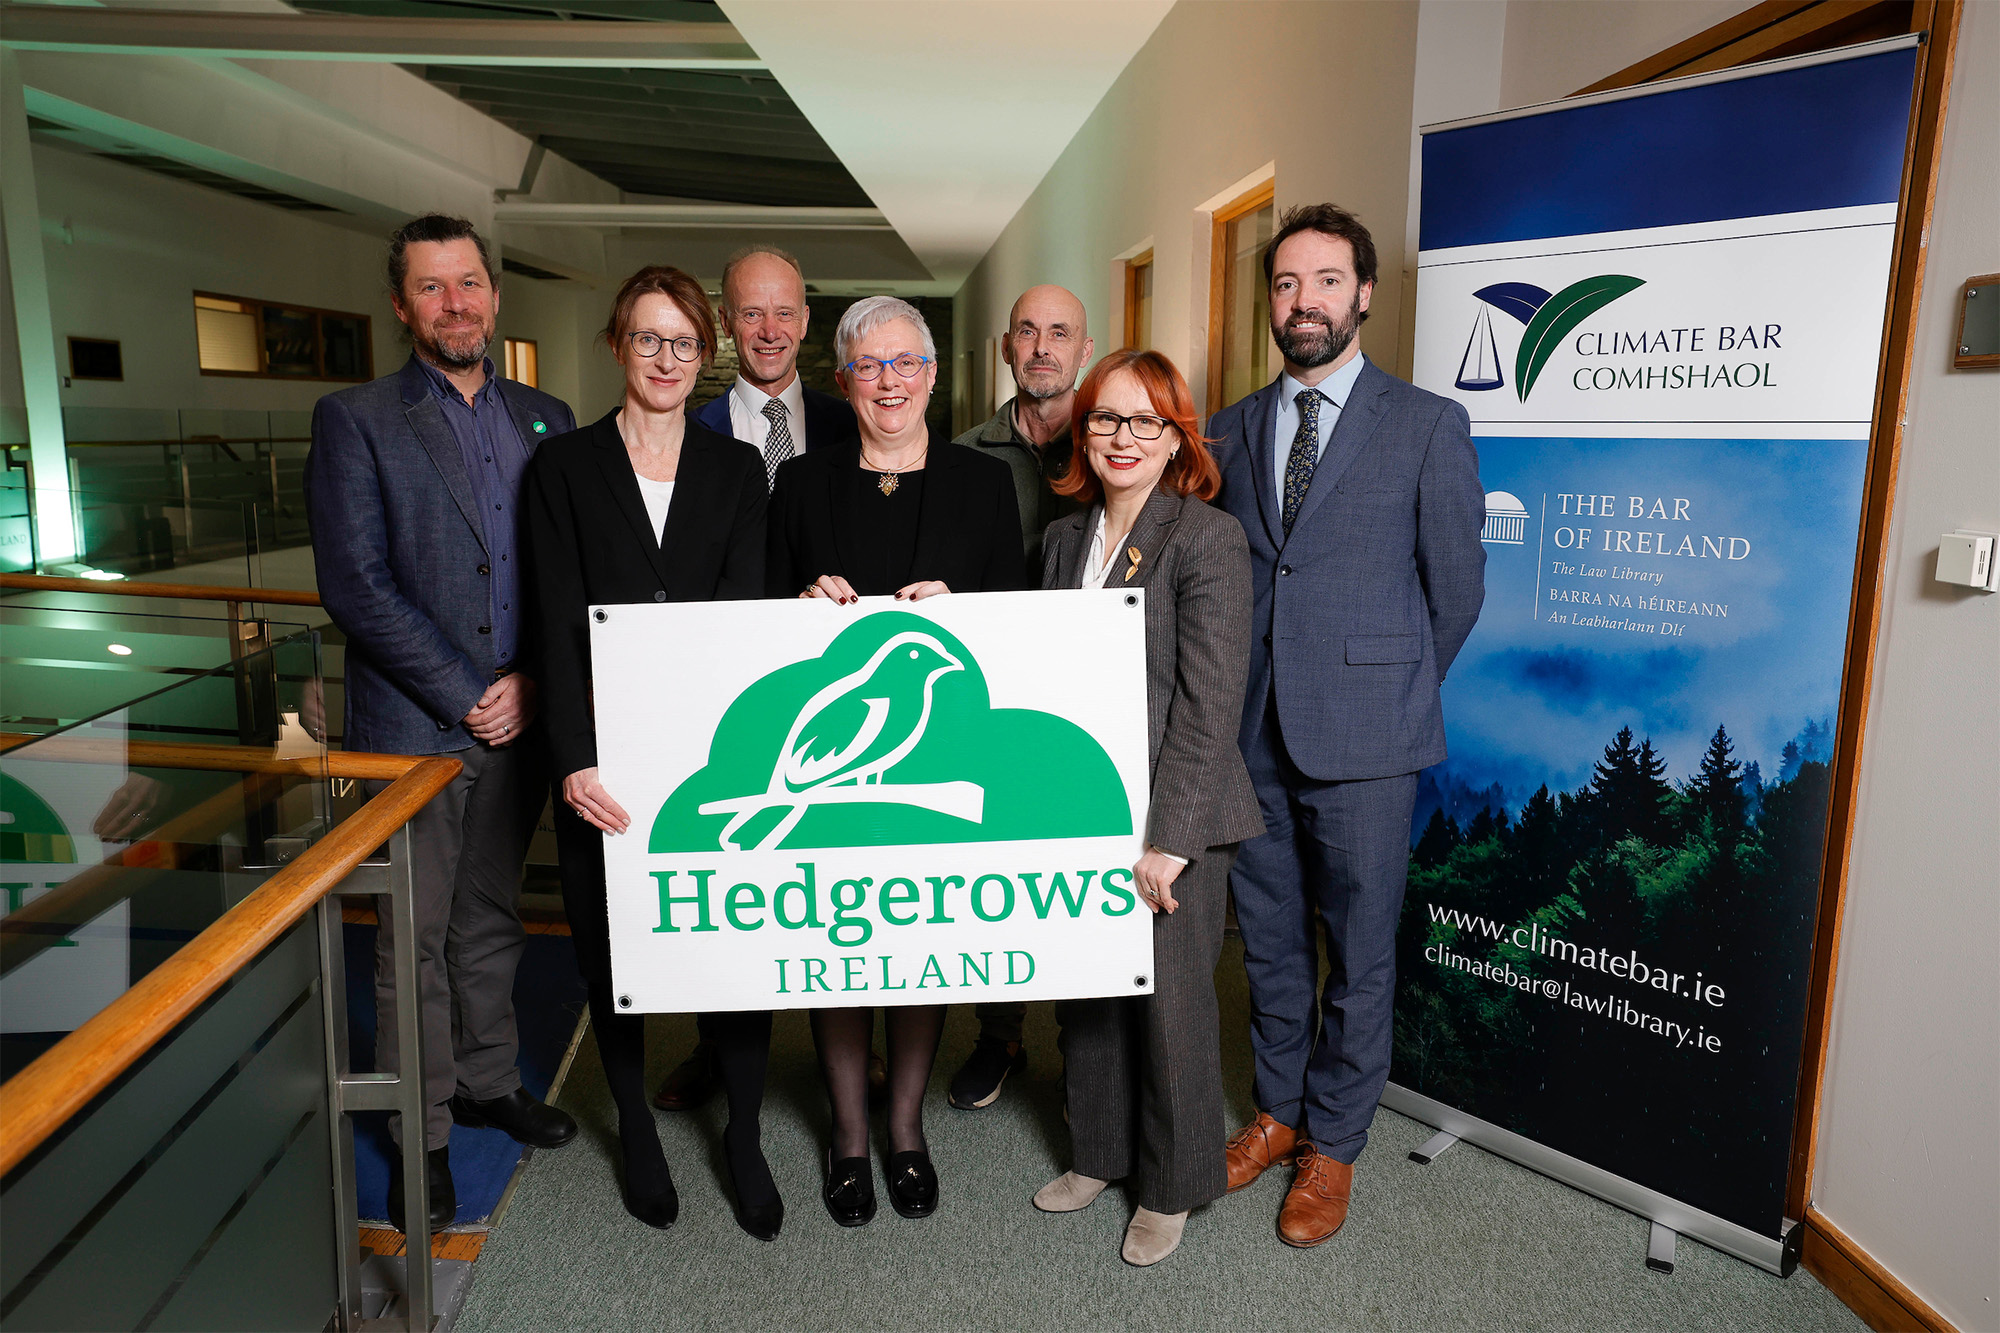 Hedgerows bill introduced to the Dáil